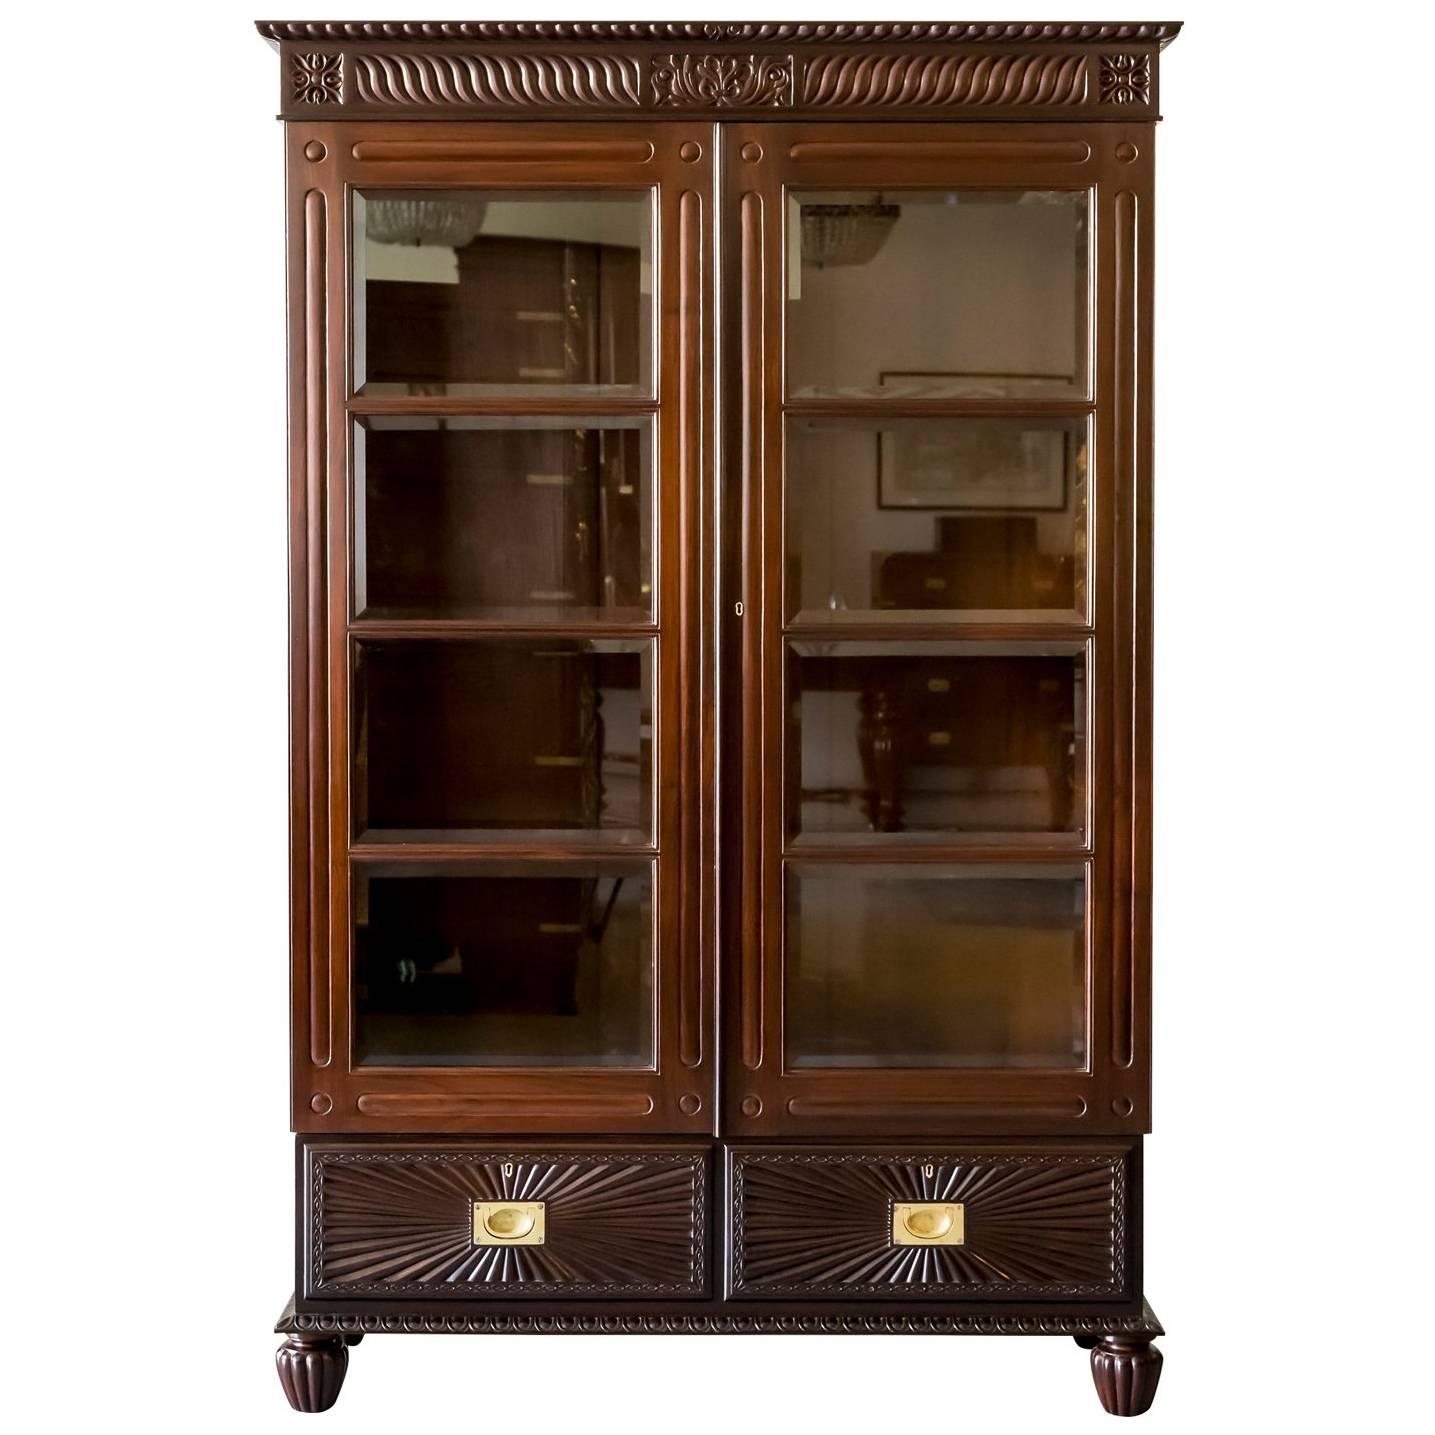 Antique Anglo-Indian or British Colonial Rosewood Bookcase